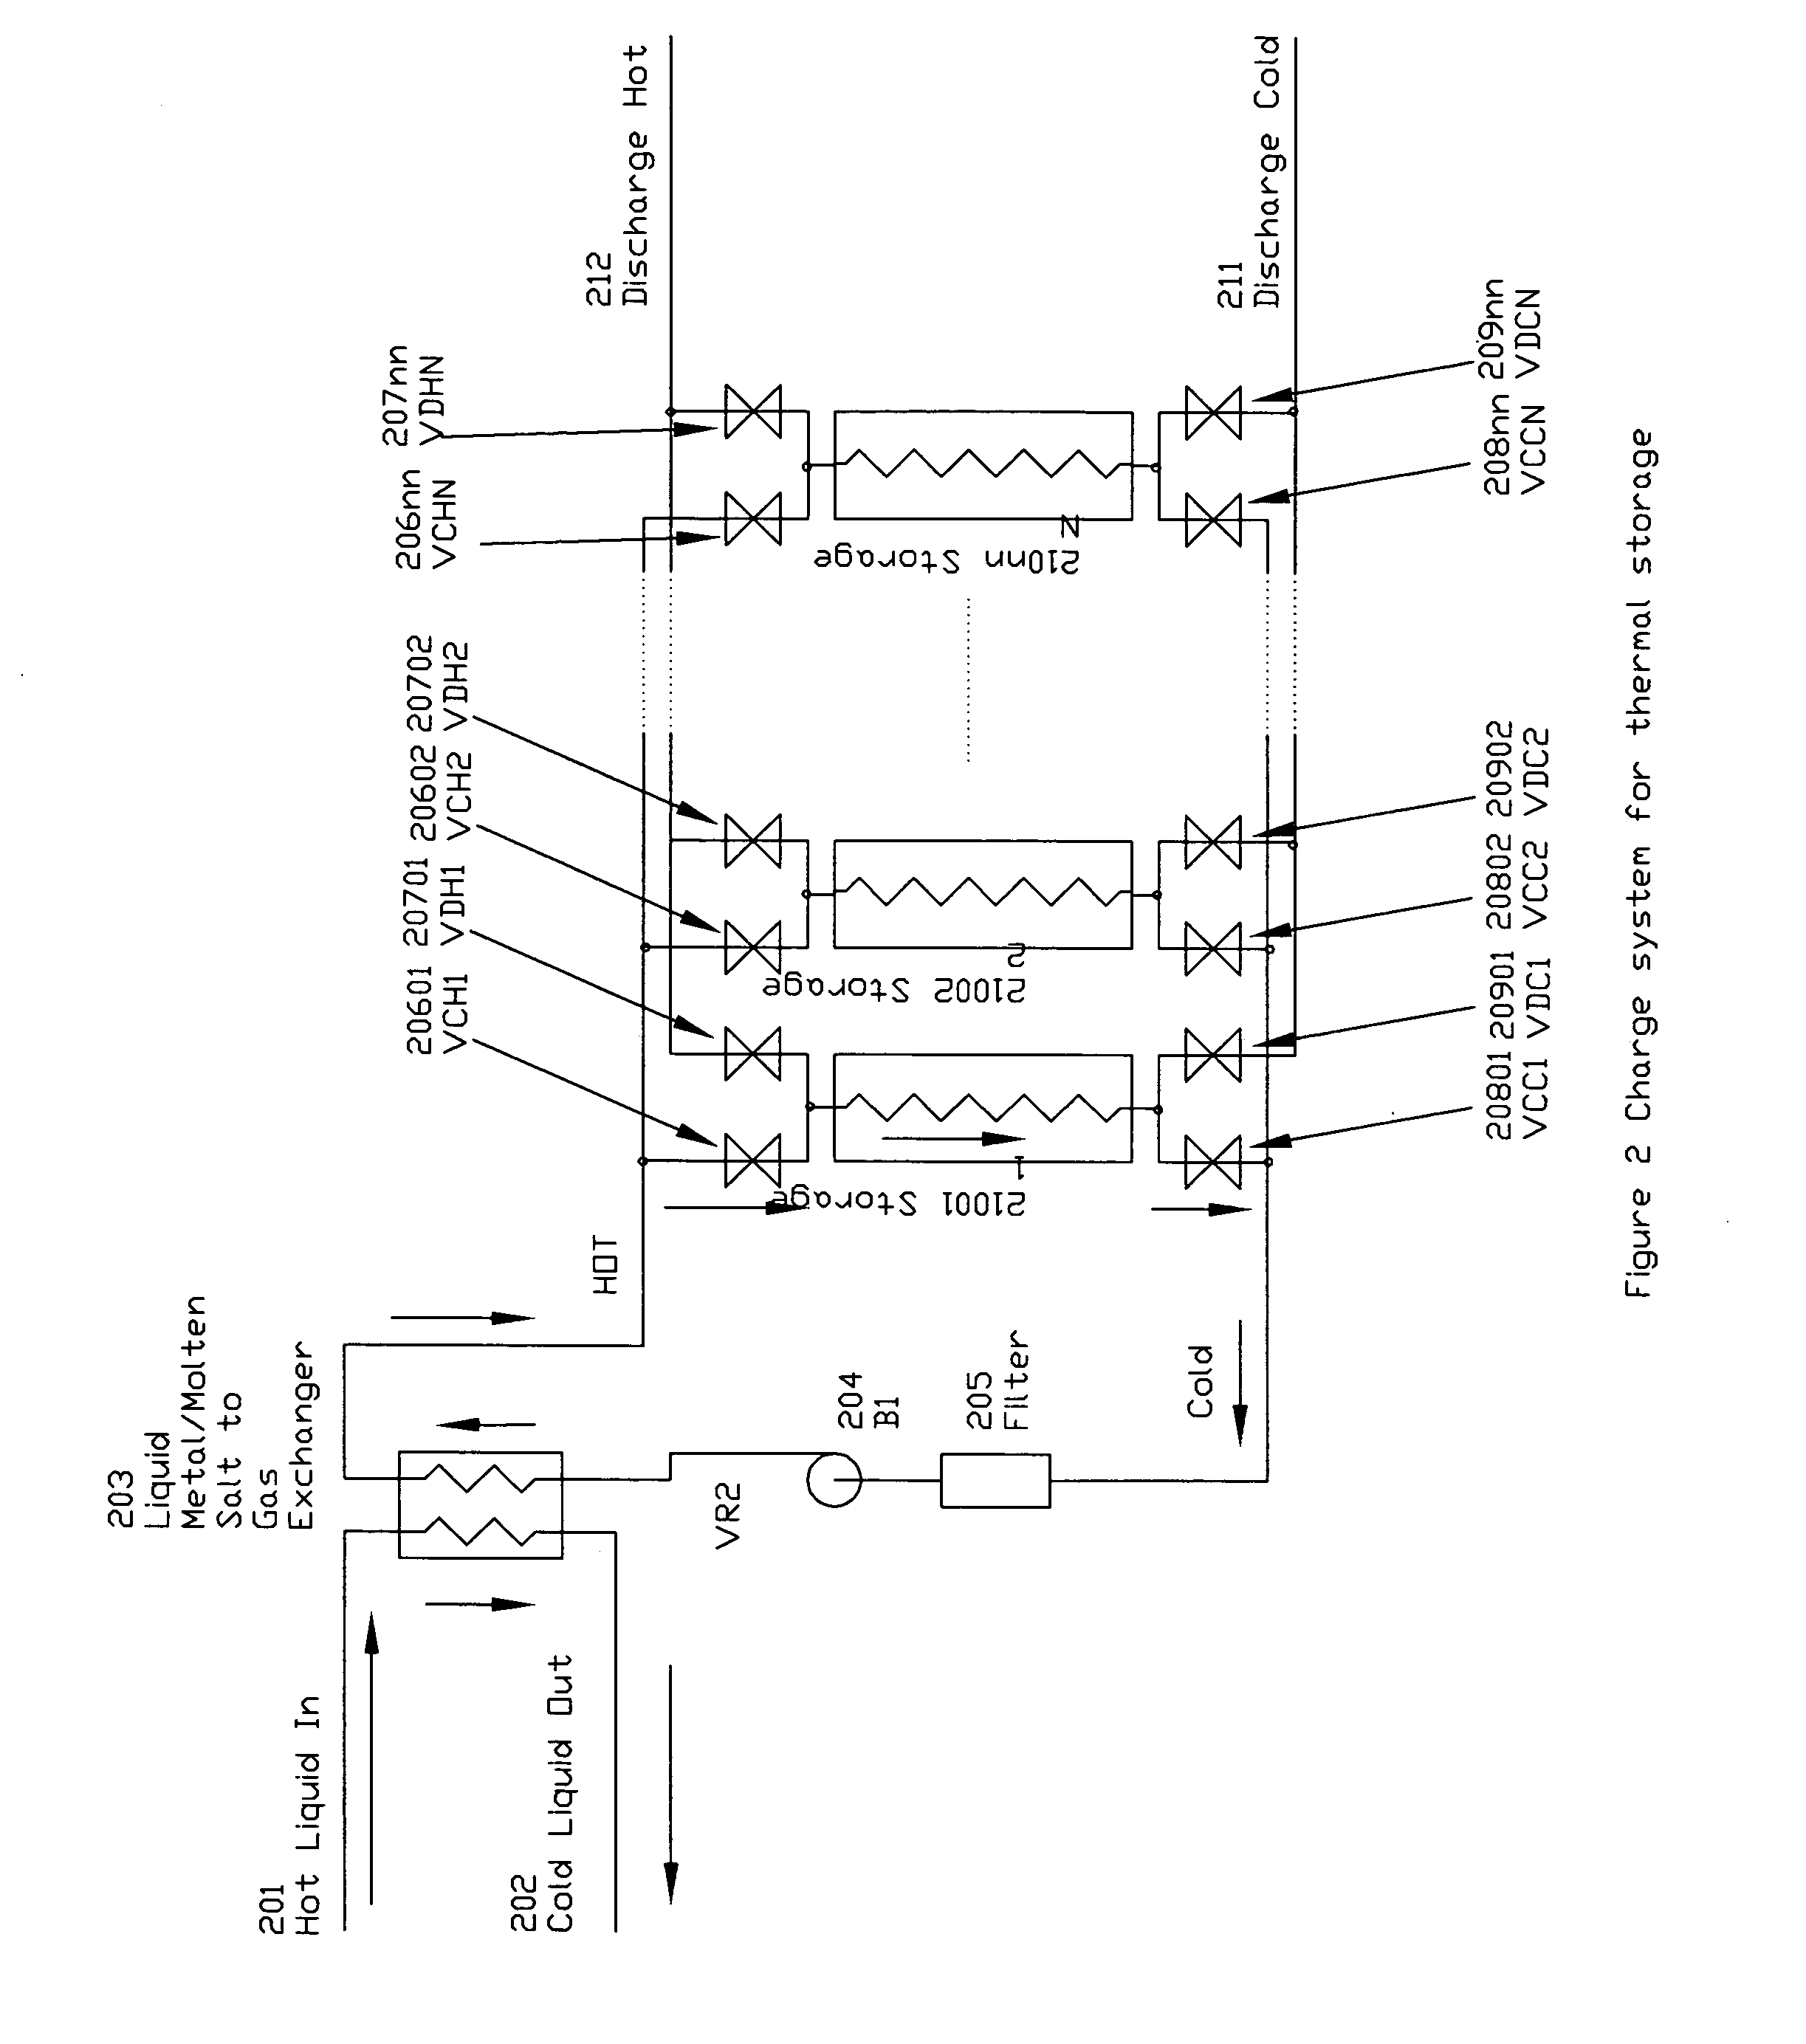 Method and apparatus for solar energy storage system using gas and rock